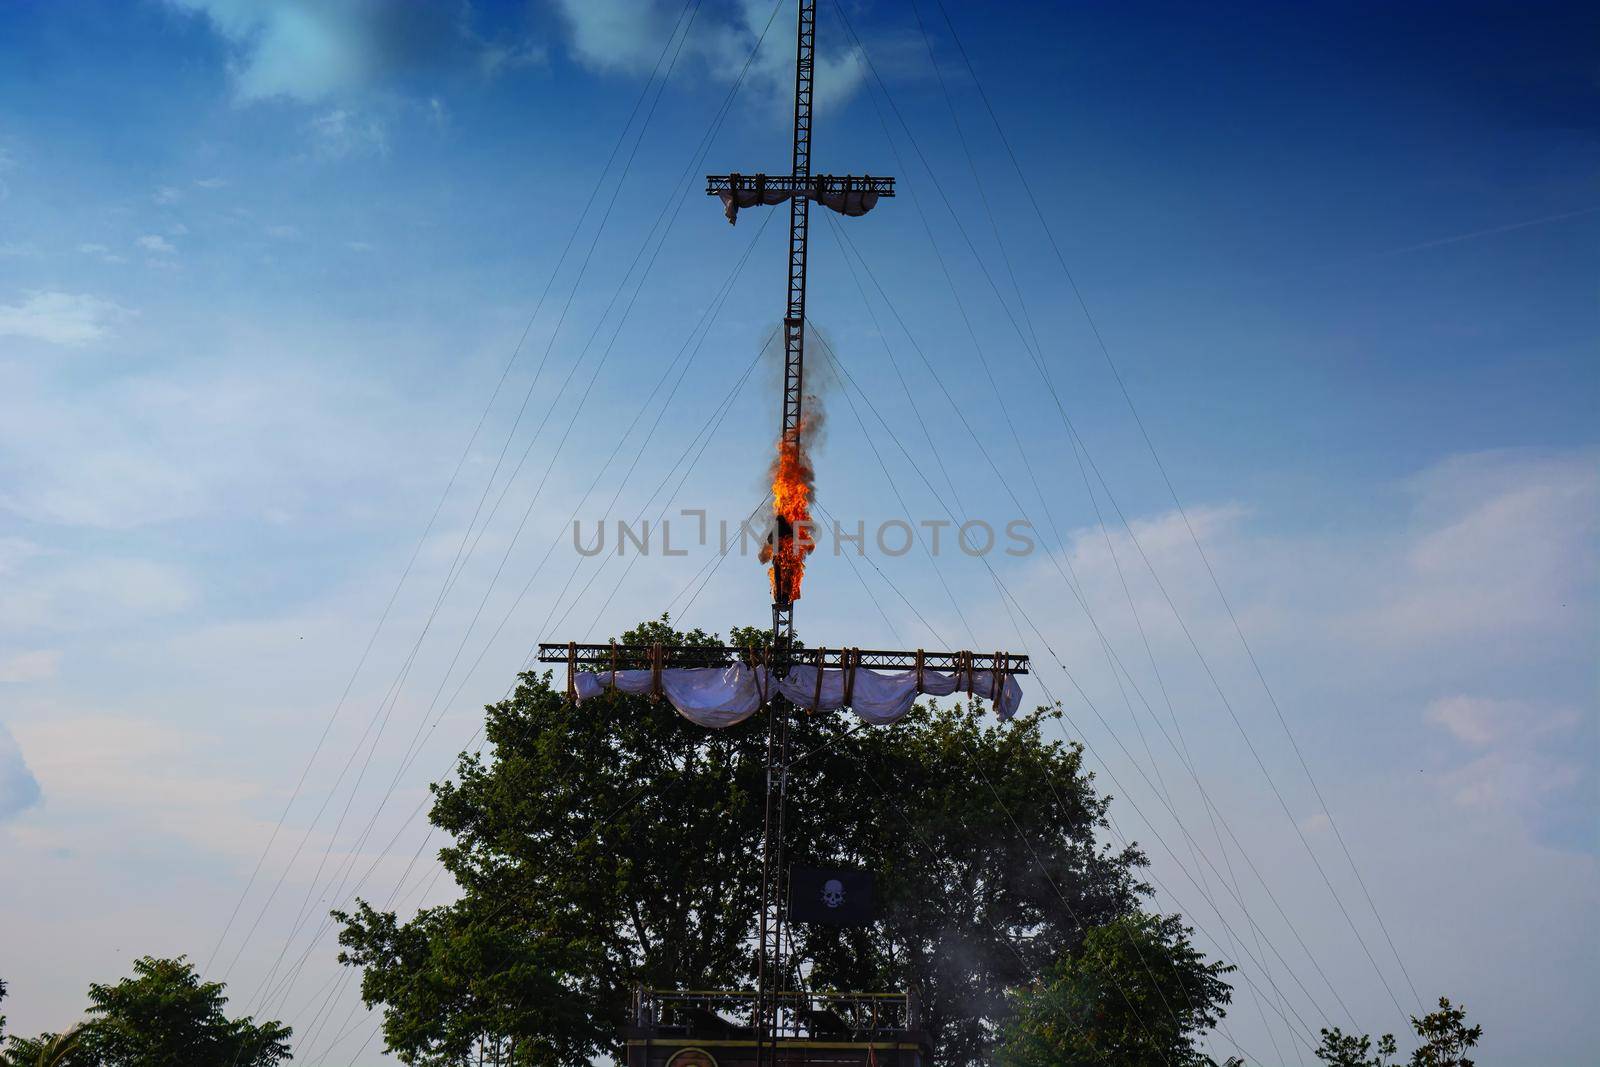 Stuntman jumping in flames from a mast by JFsPic